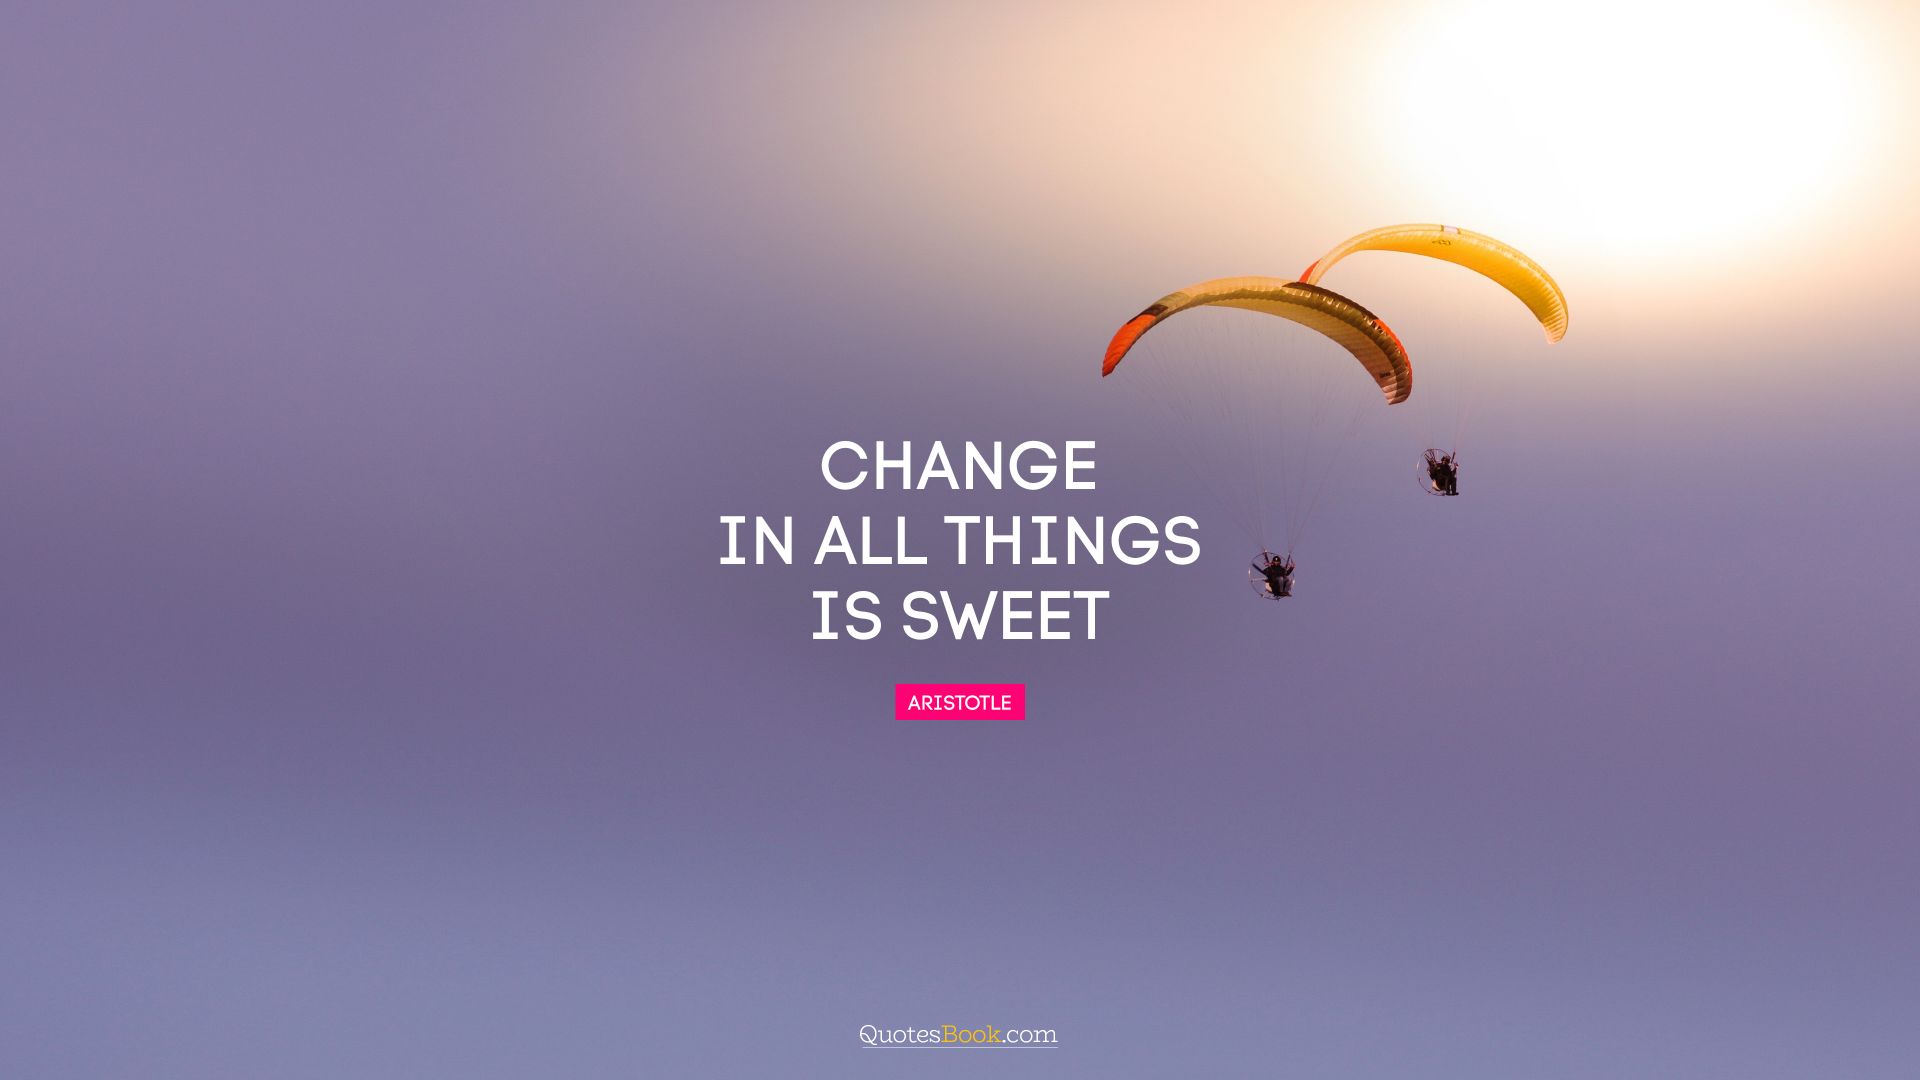 Change in all things is sweet. - Quote by Aristotle